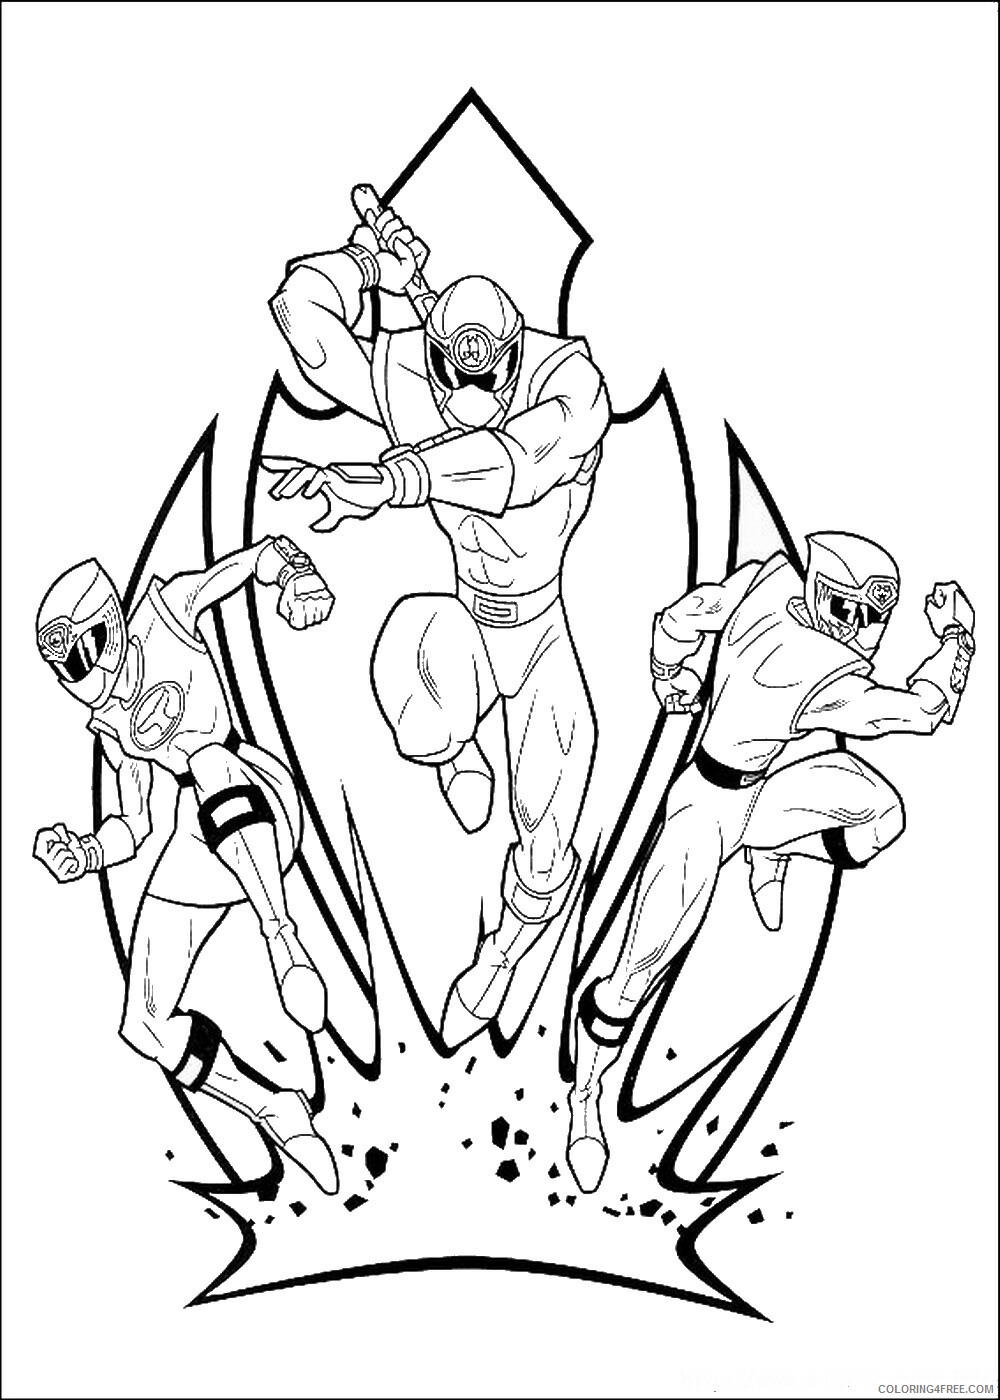 Power Rangers Coloring Pages TV Film power_ranger_84 Printable 2020 06696 Coloring4free